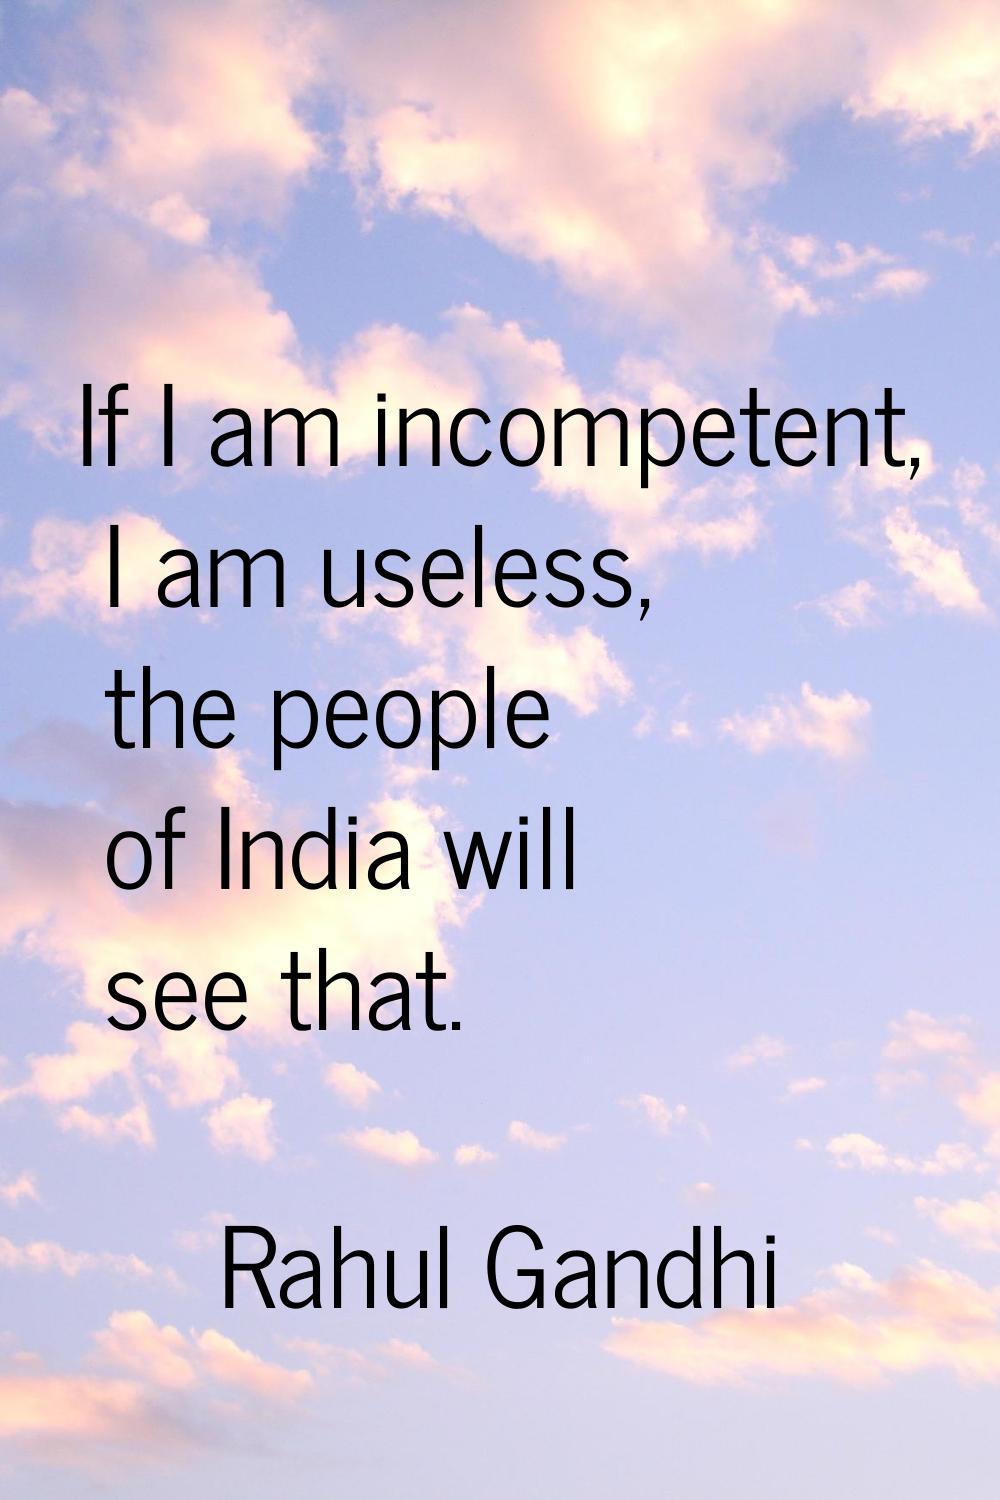 If I am incompetent, I am useless, the people of India will see that.